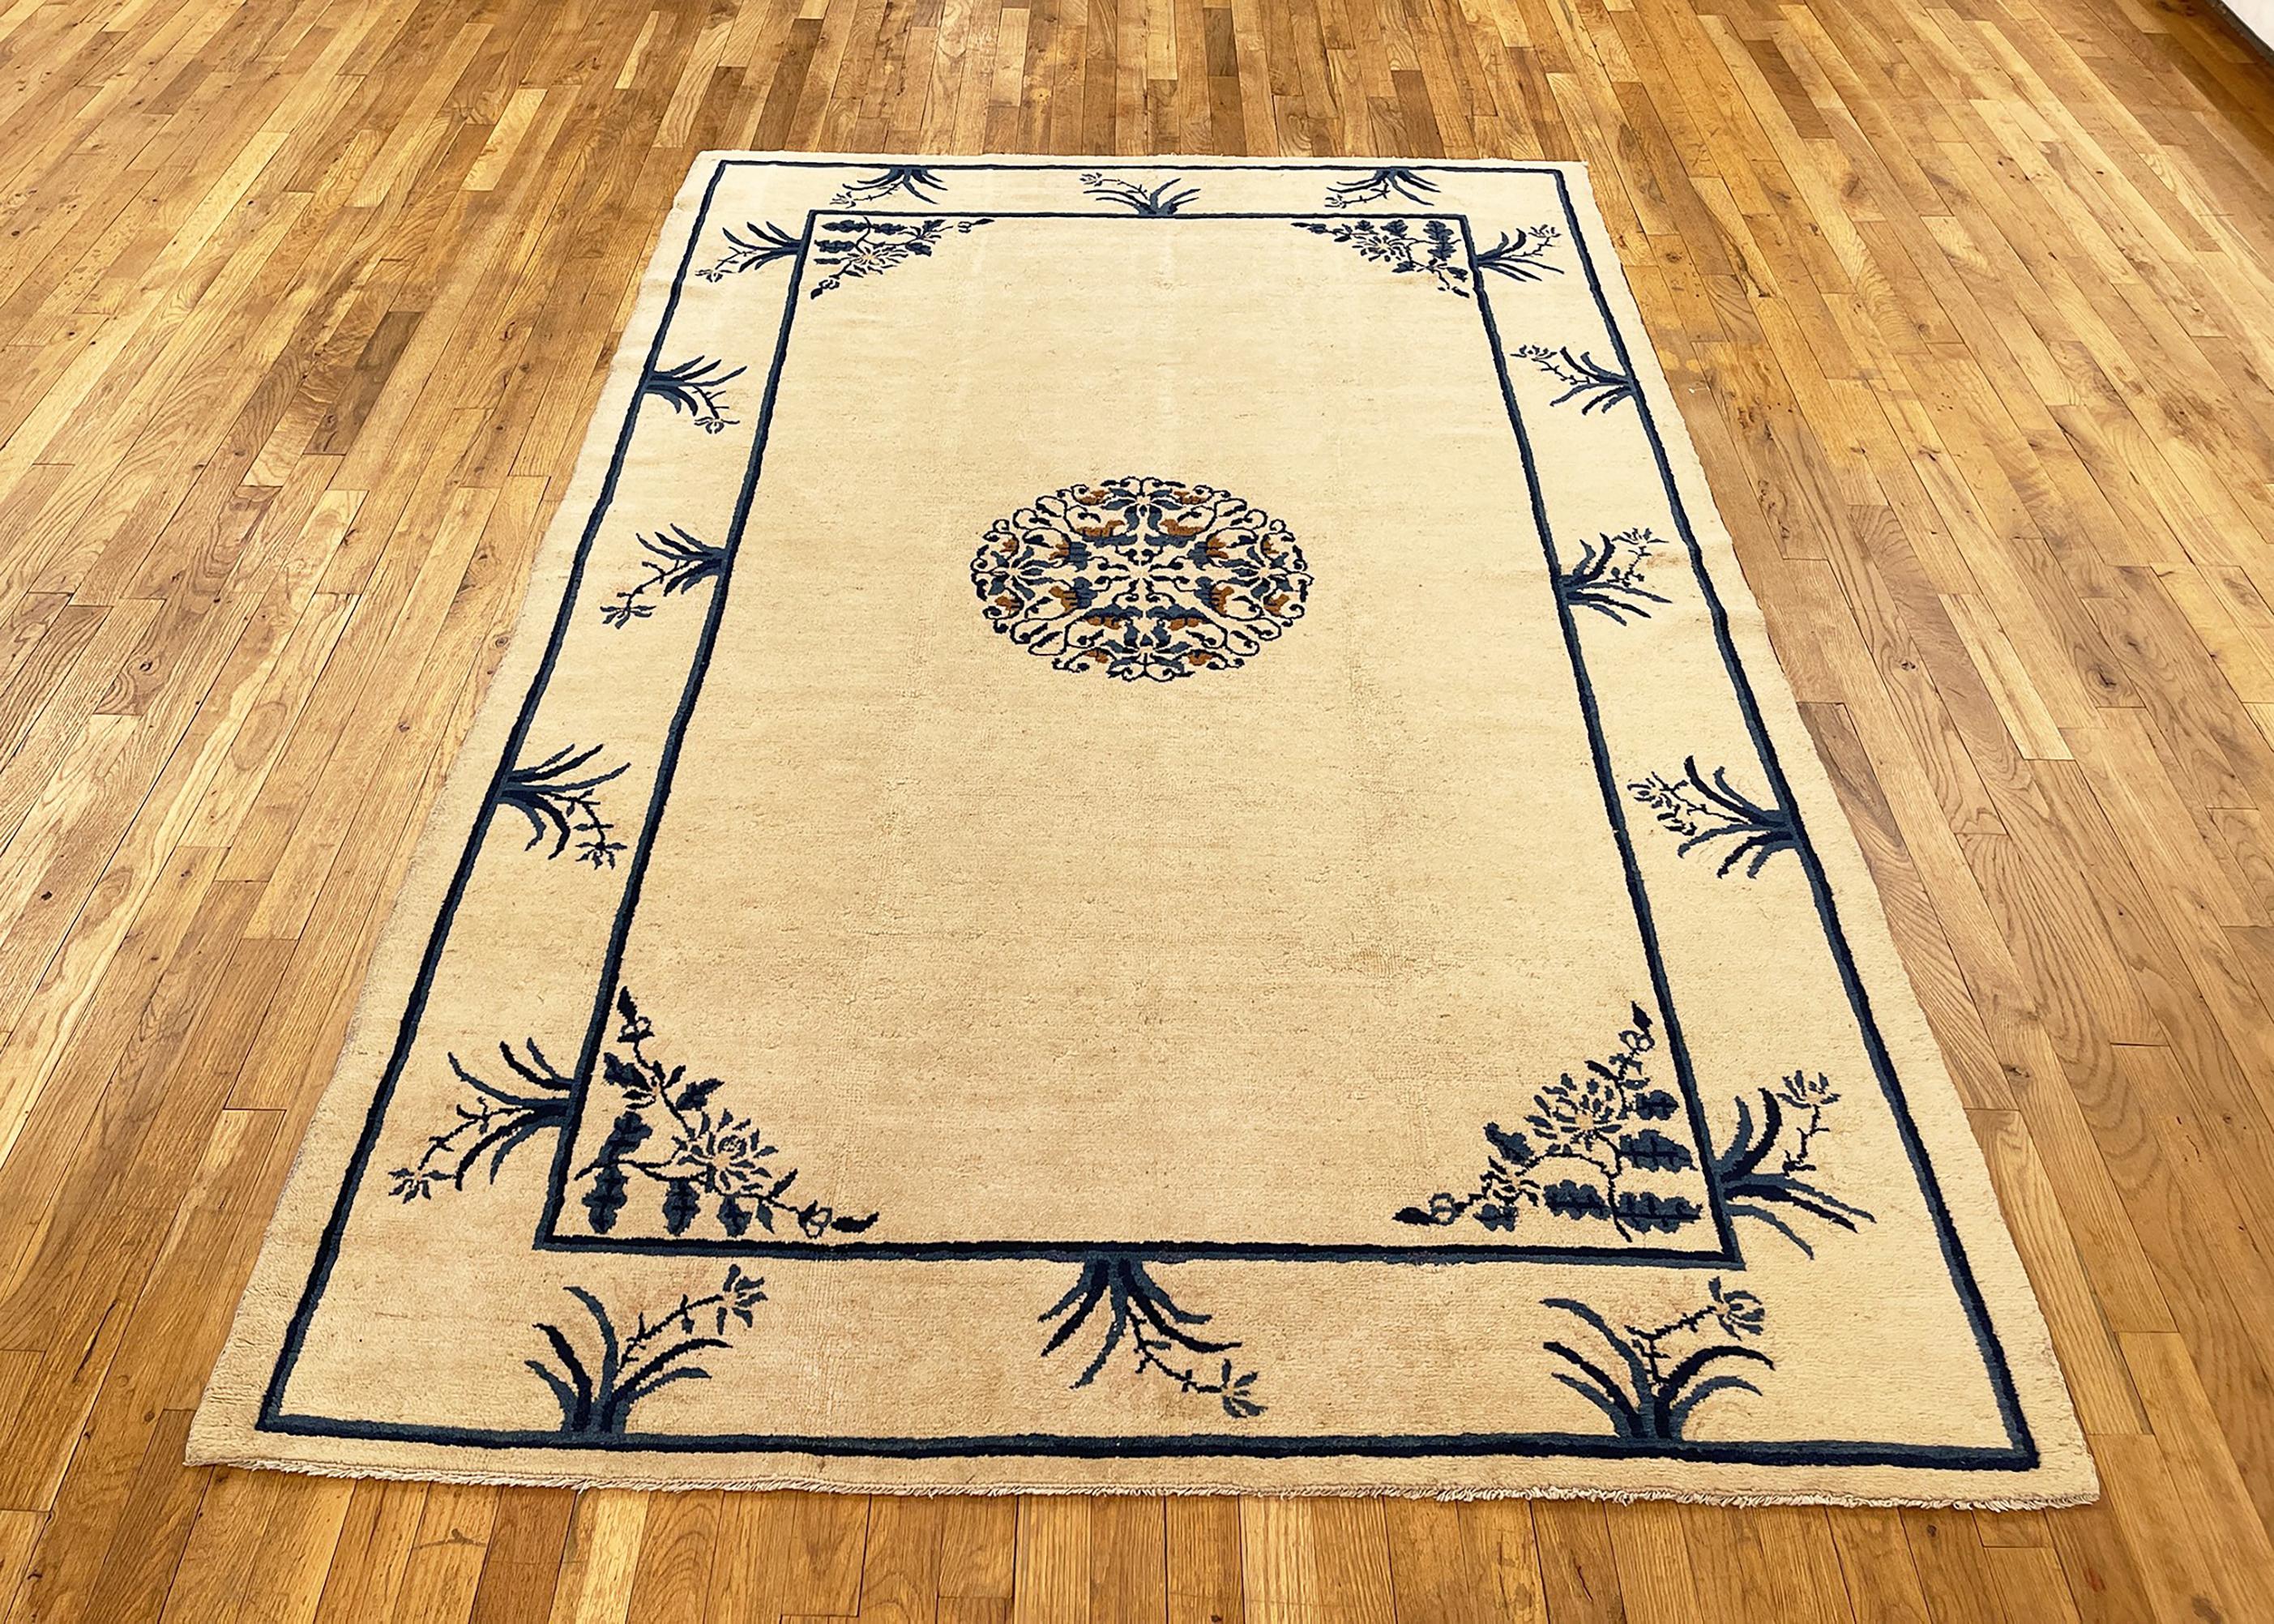 Antique Chinese peking rug, small size, circa 1900.

A one-of-a-kind antique Chinese Mandarin oriental carpet, hand-knotted with medium thickness wool pile. This beautiful rug features a central medallion on an ivory central field, with a blue